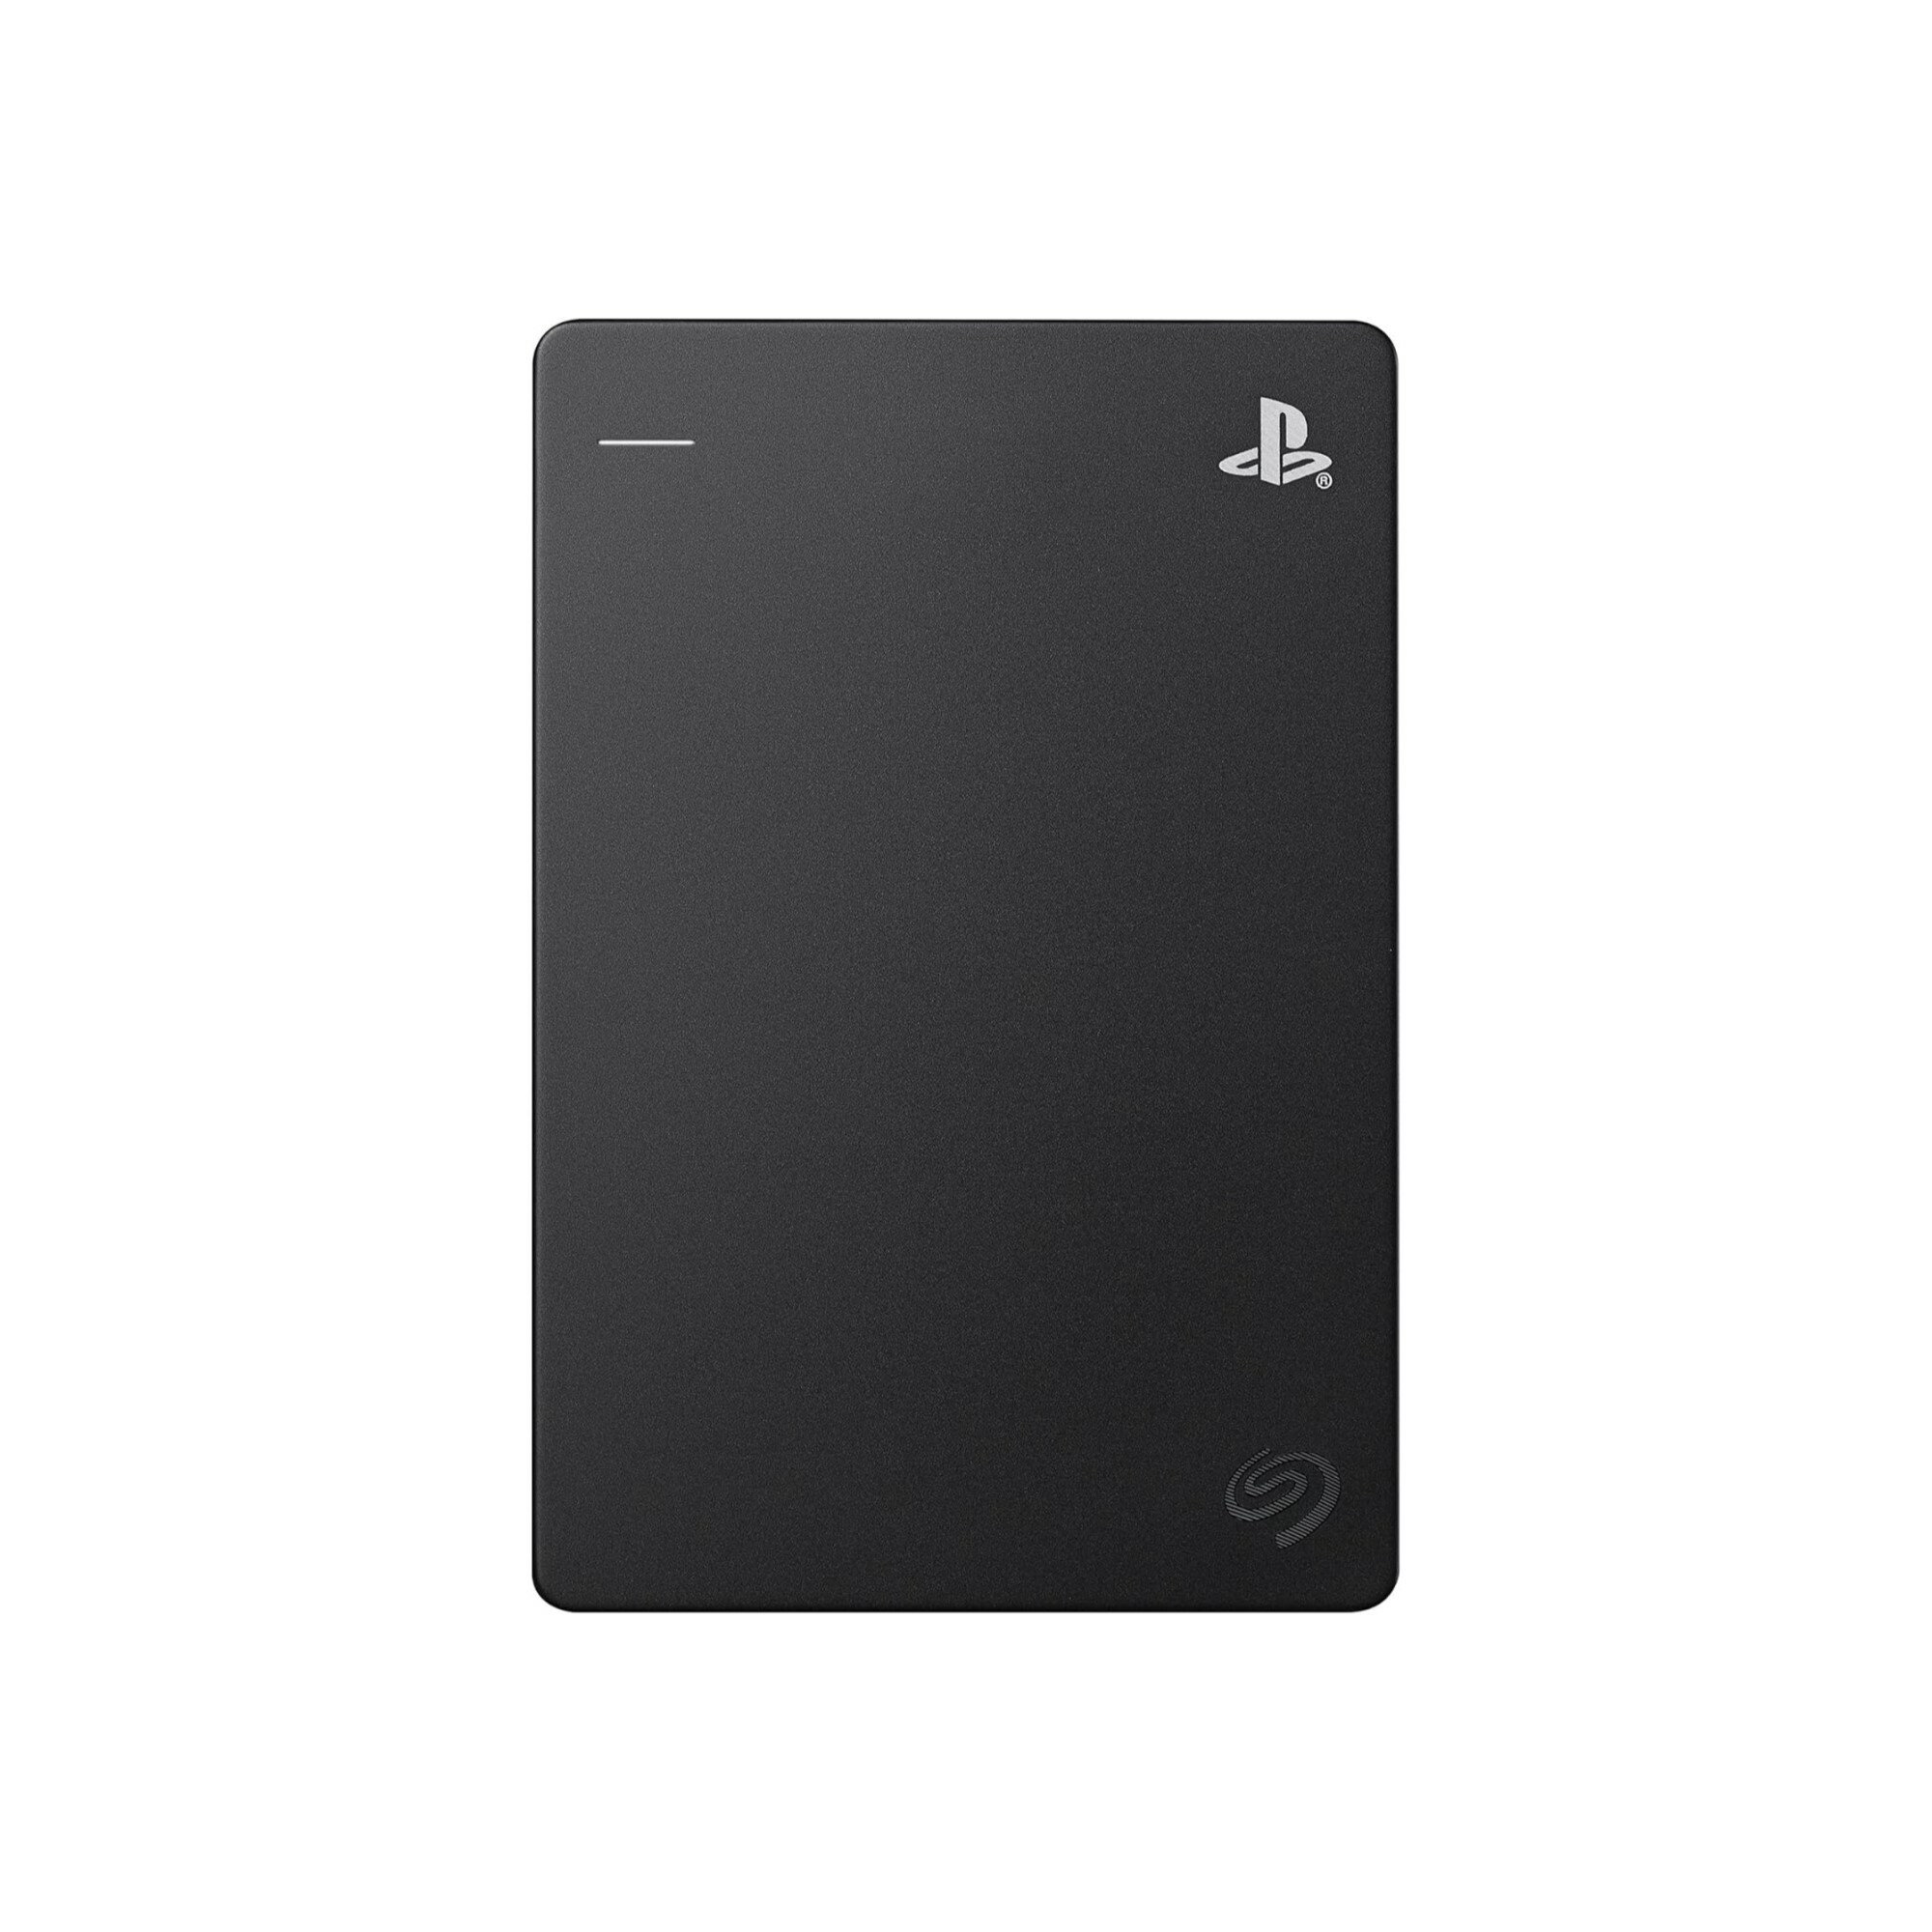 Seagate シーゲイト Gaming Portable HDD PlayStation4 公式ライセンス認証品 2TB 【PS5】動作確認済　正規代理店 STGD2000300